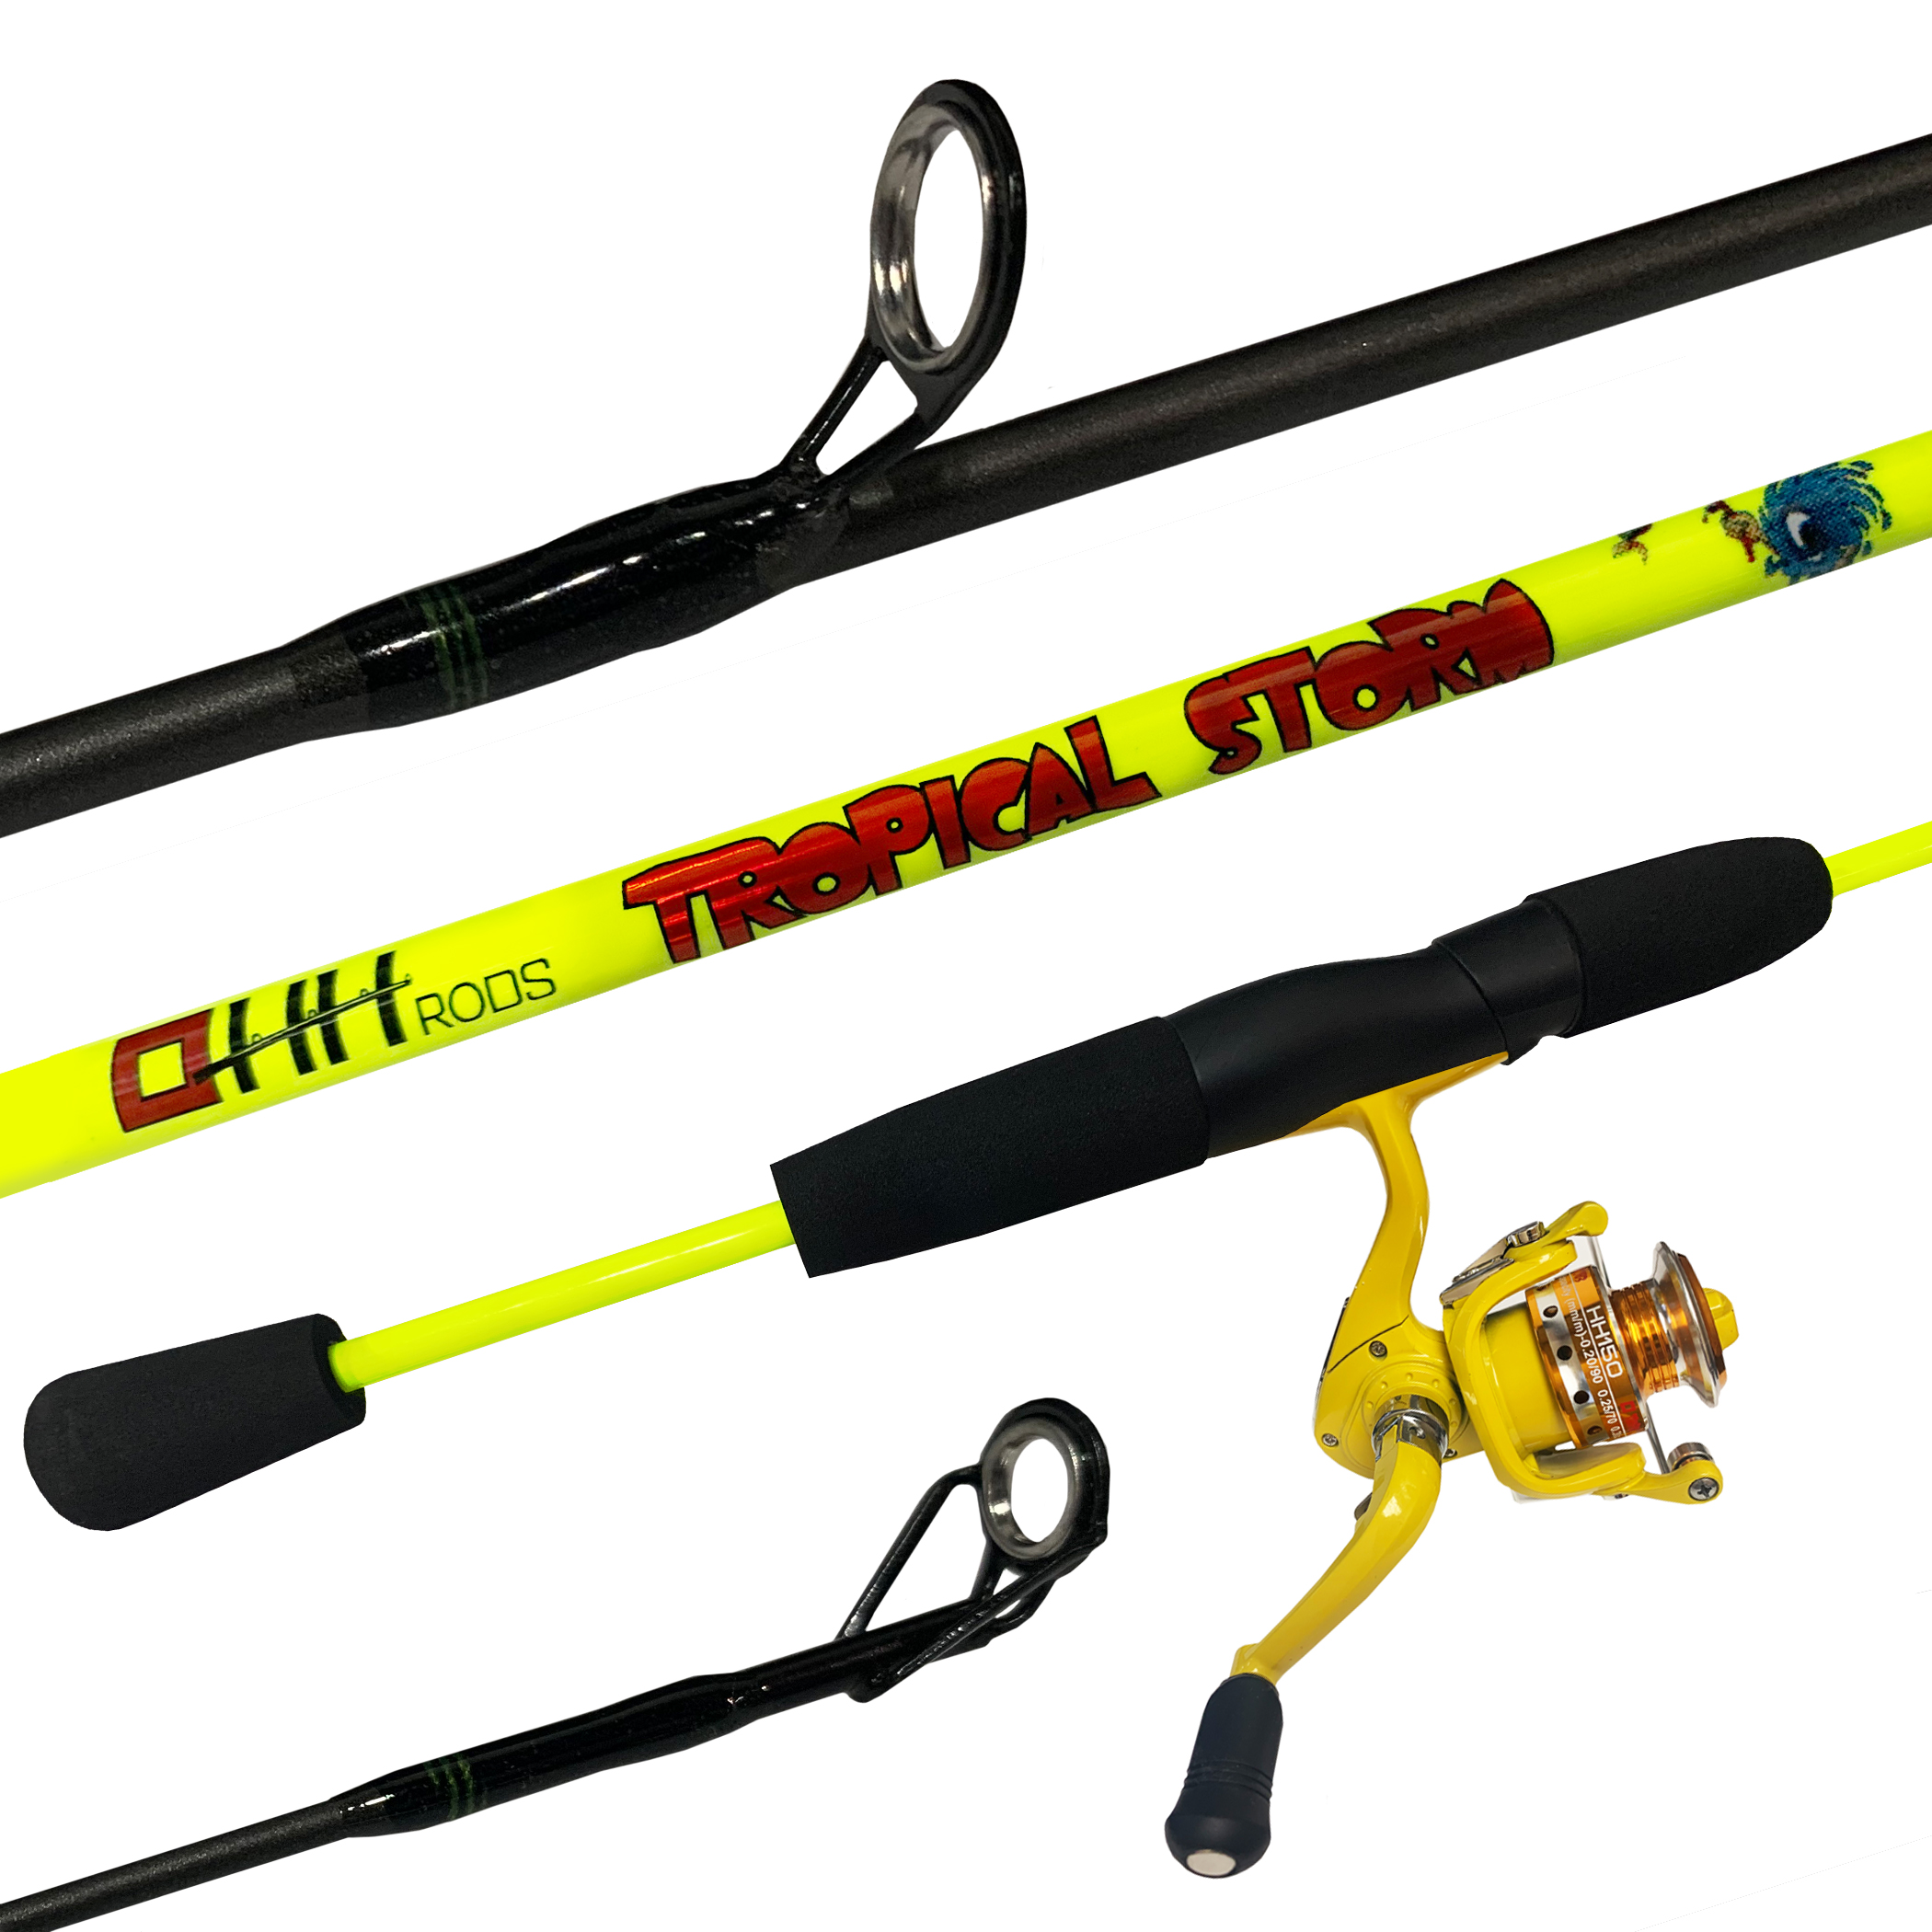 Lew's Mr. Crappie Slab Shaker Spinning Rod